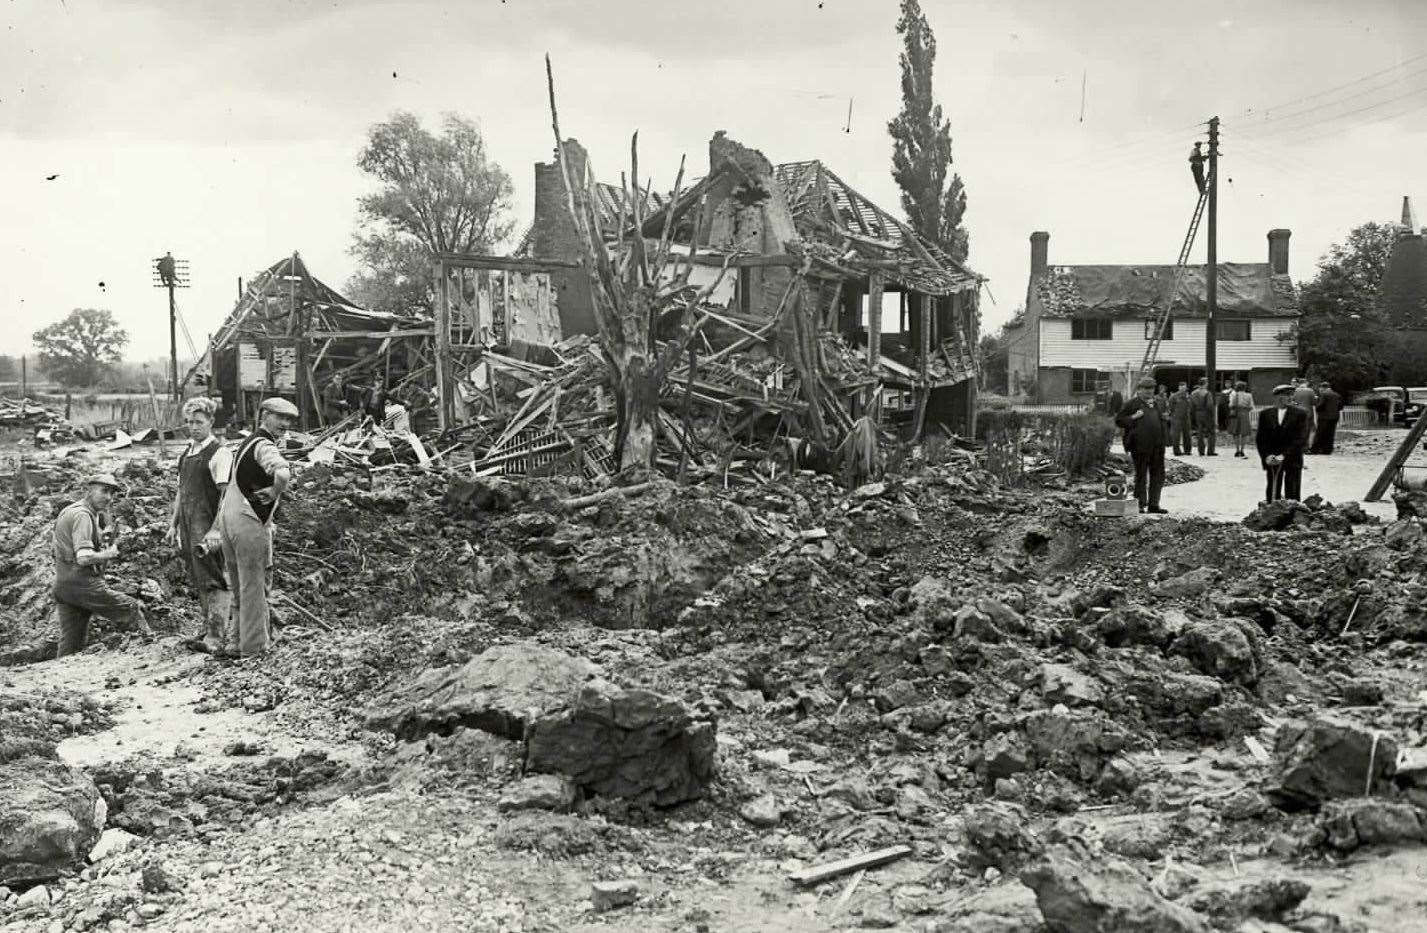 This was the devastation caused when a V1 flying bomb fell at Smarden, near Ashford, in October 1944